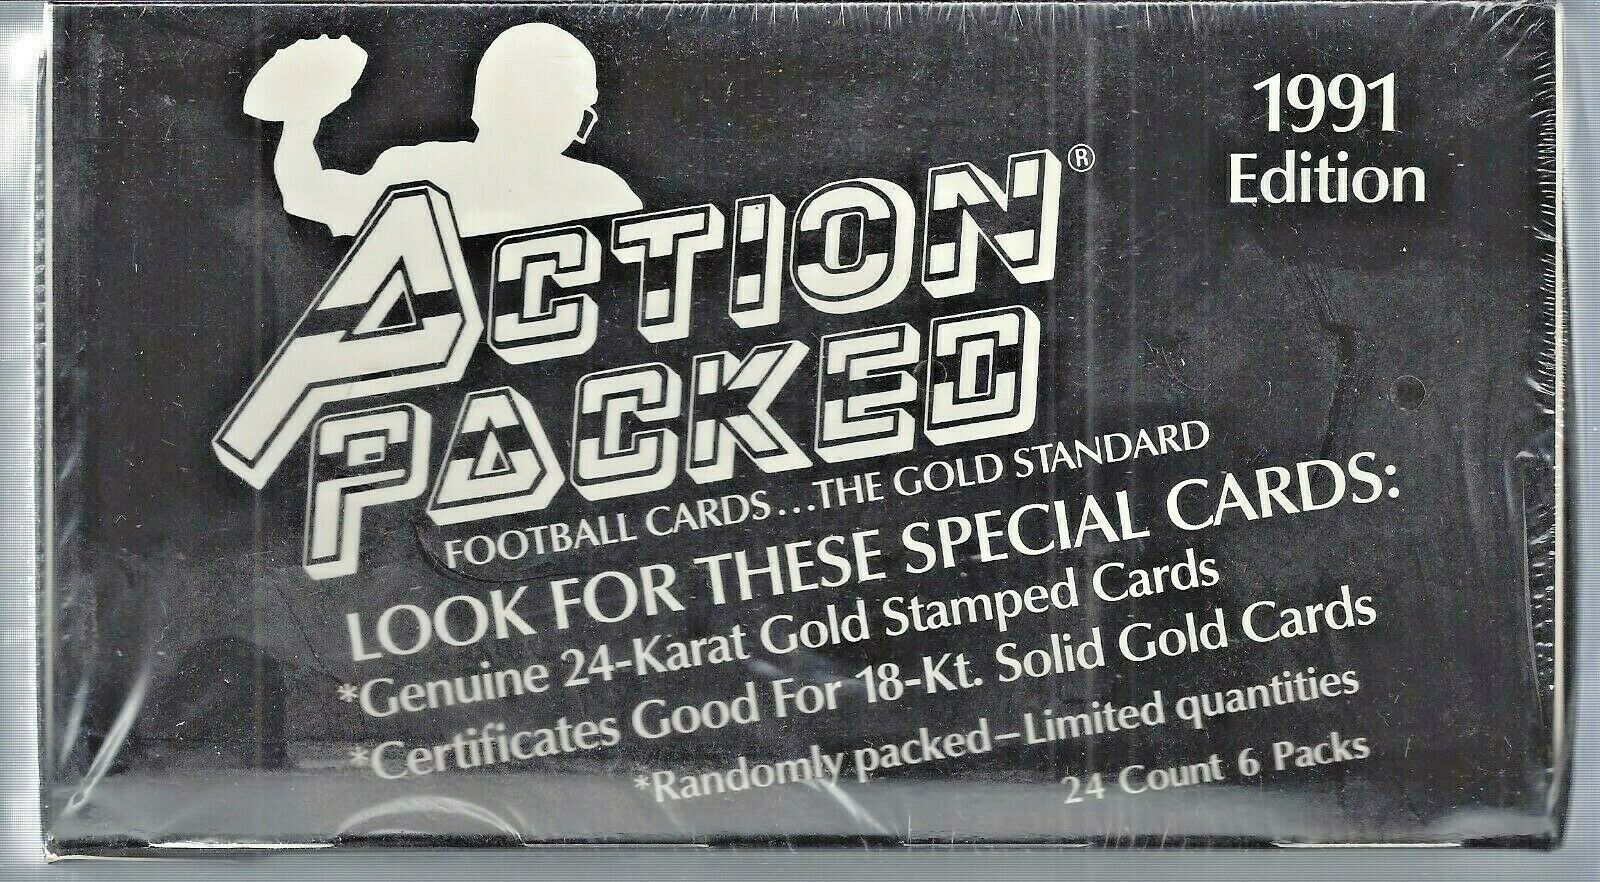 1991 Edition Action Packed Football Trading Cards Box - Miraj Trading